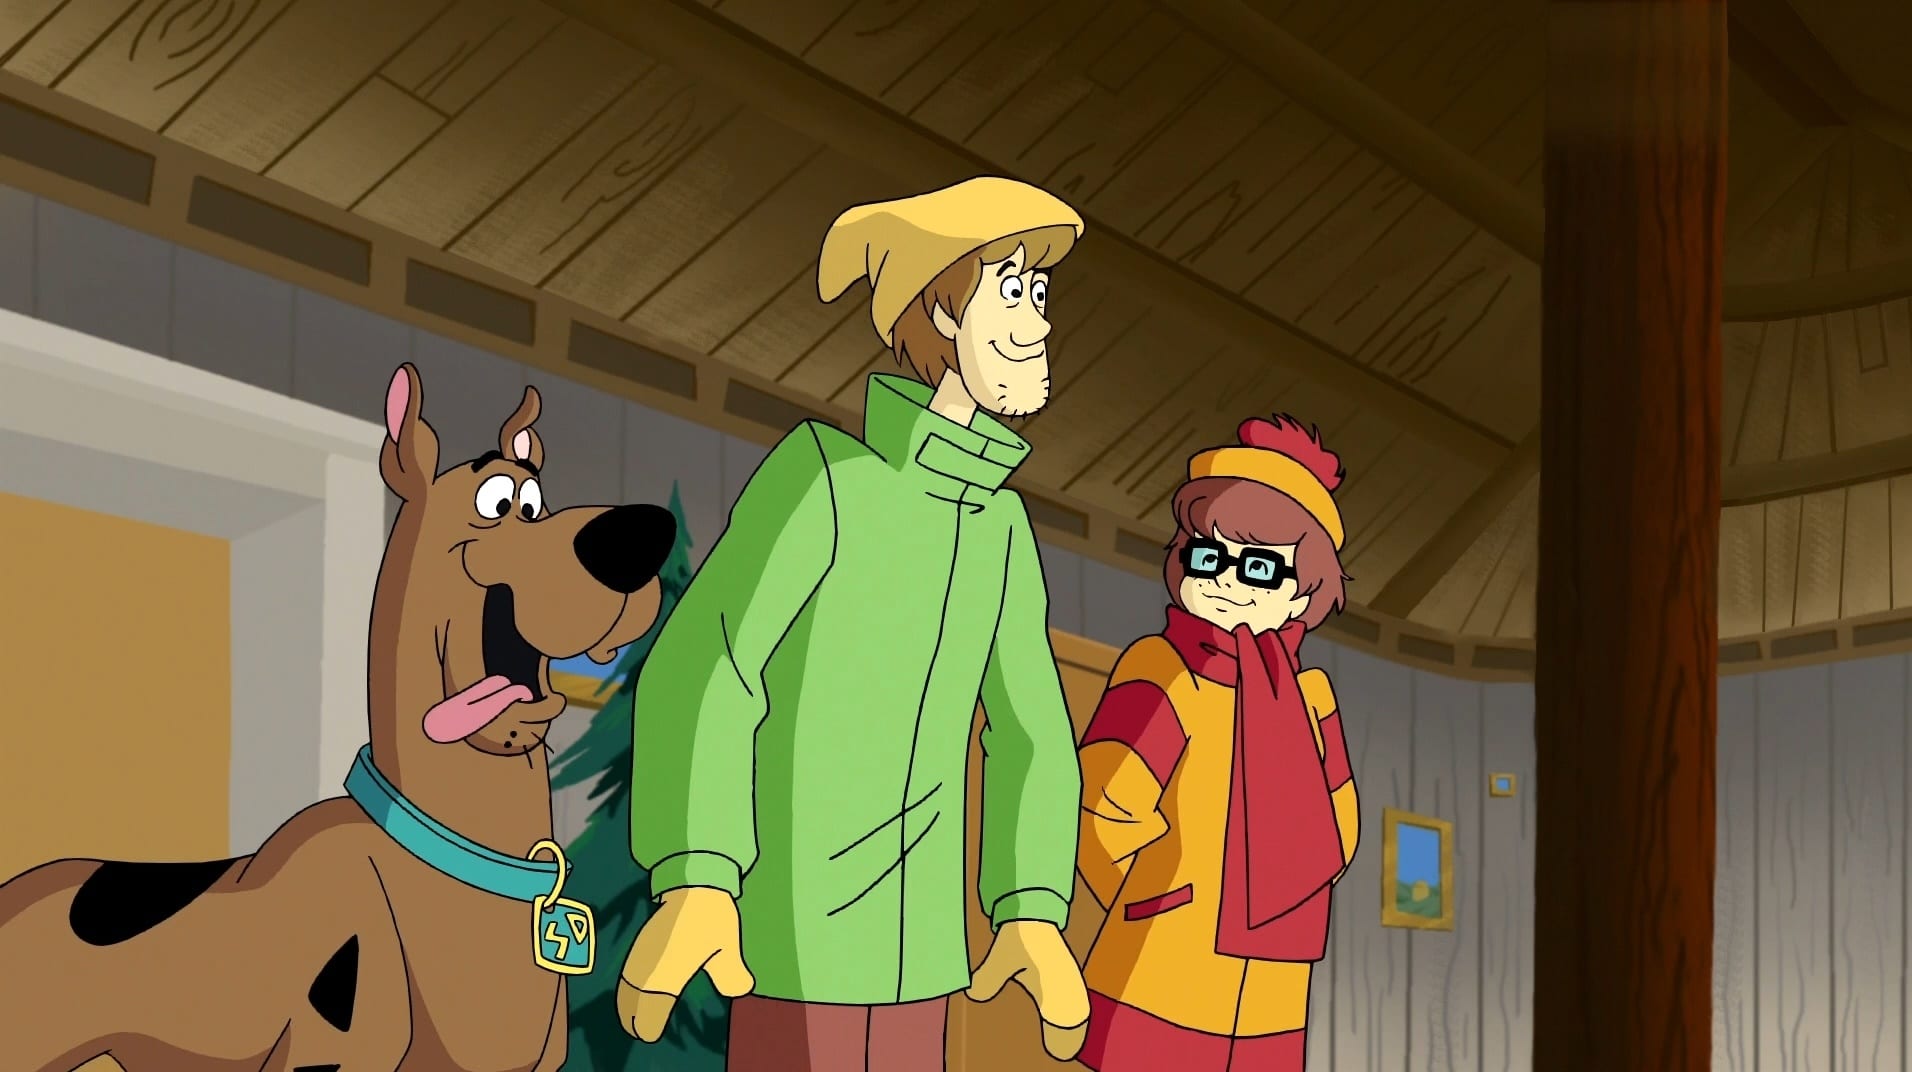 What's New, Scooby-Doo? - Season 1 Episode 1 : There's No Creature Like Snow Creature